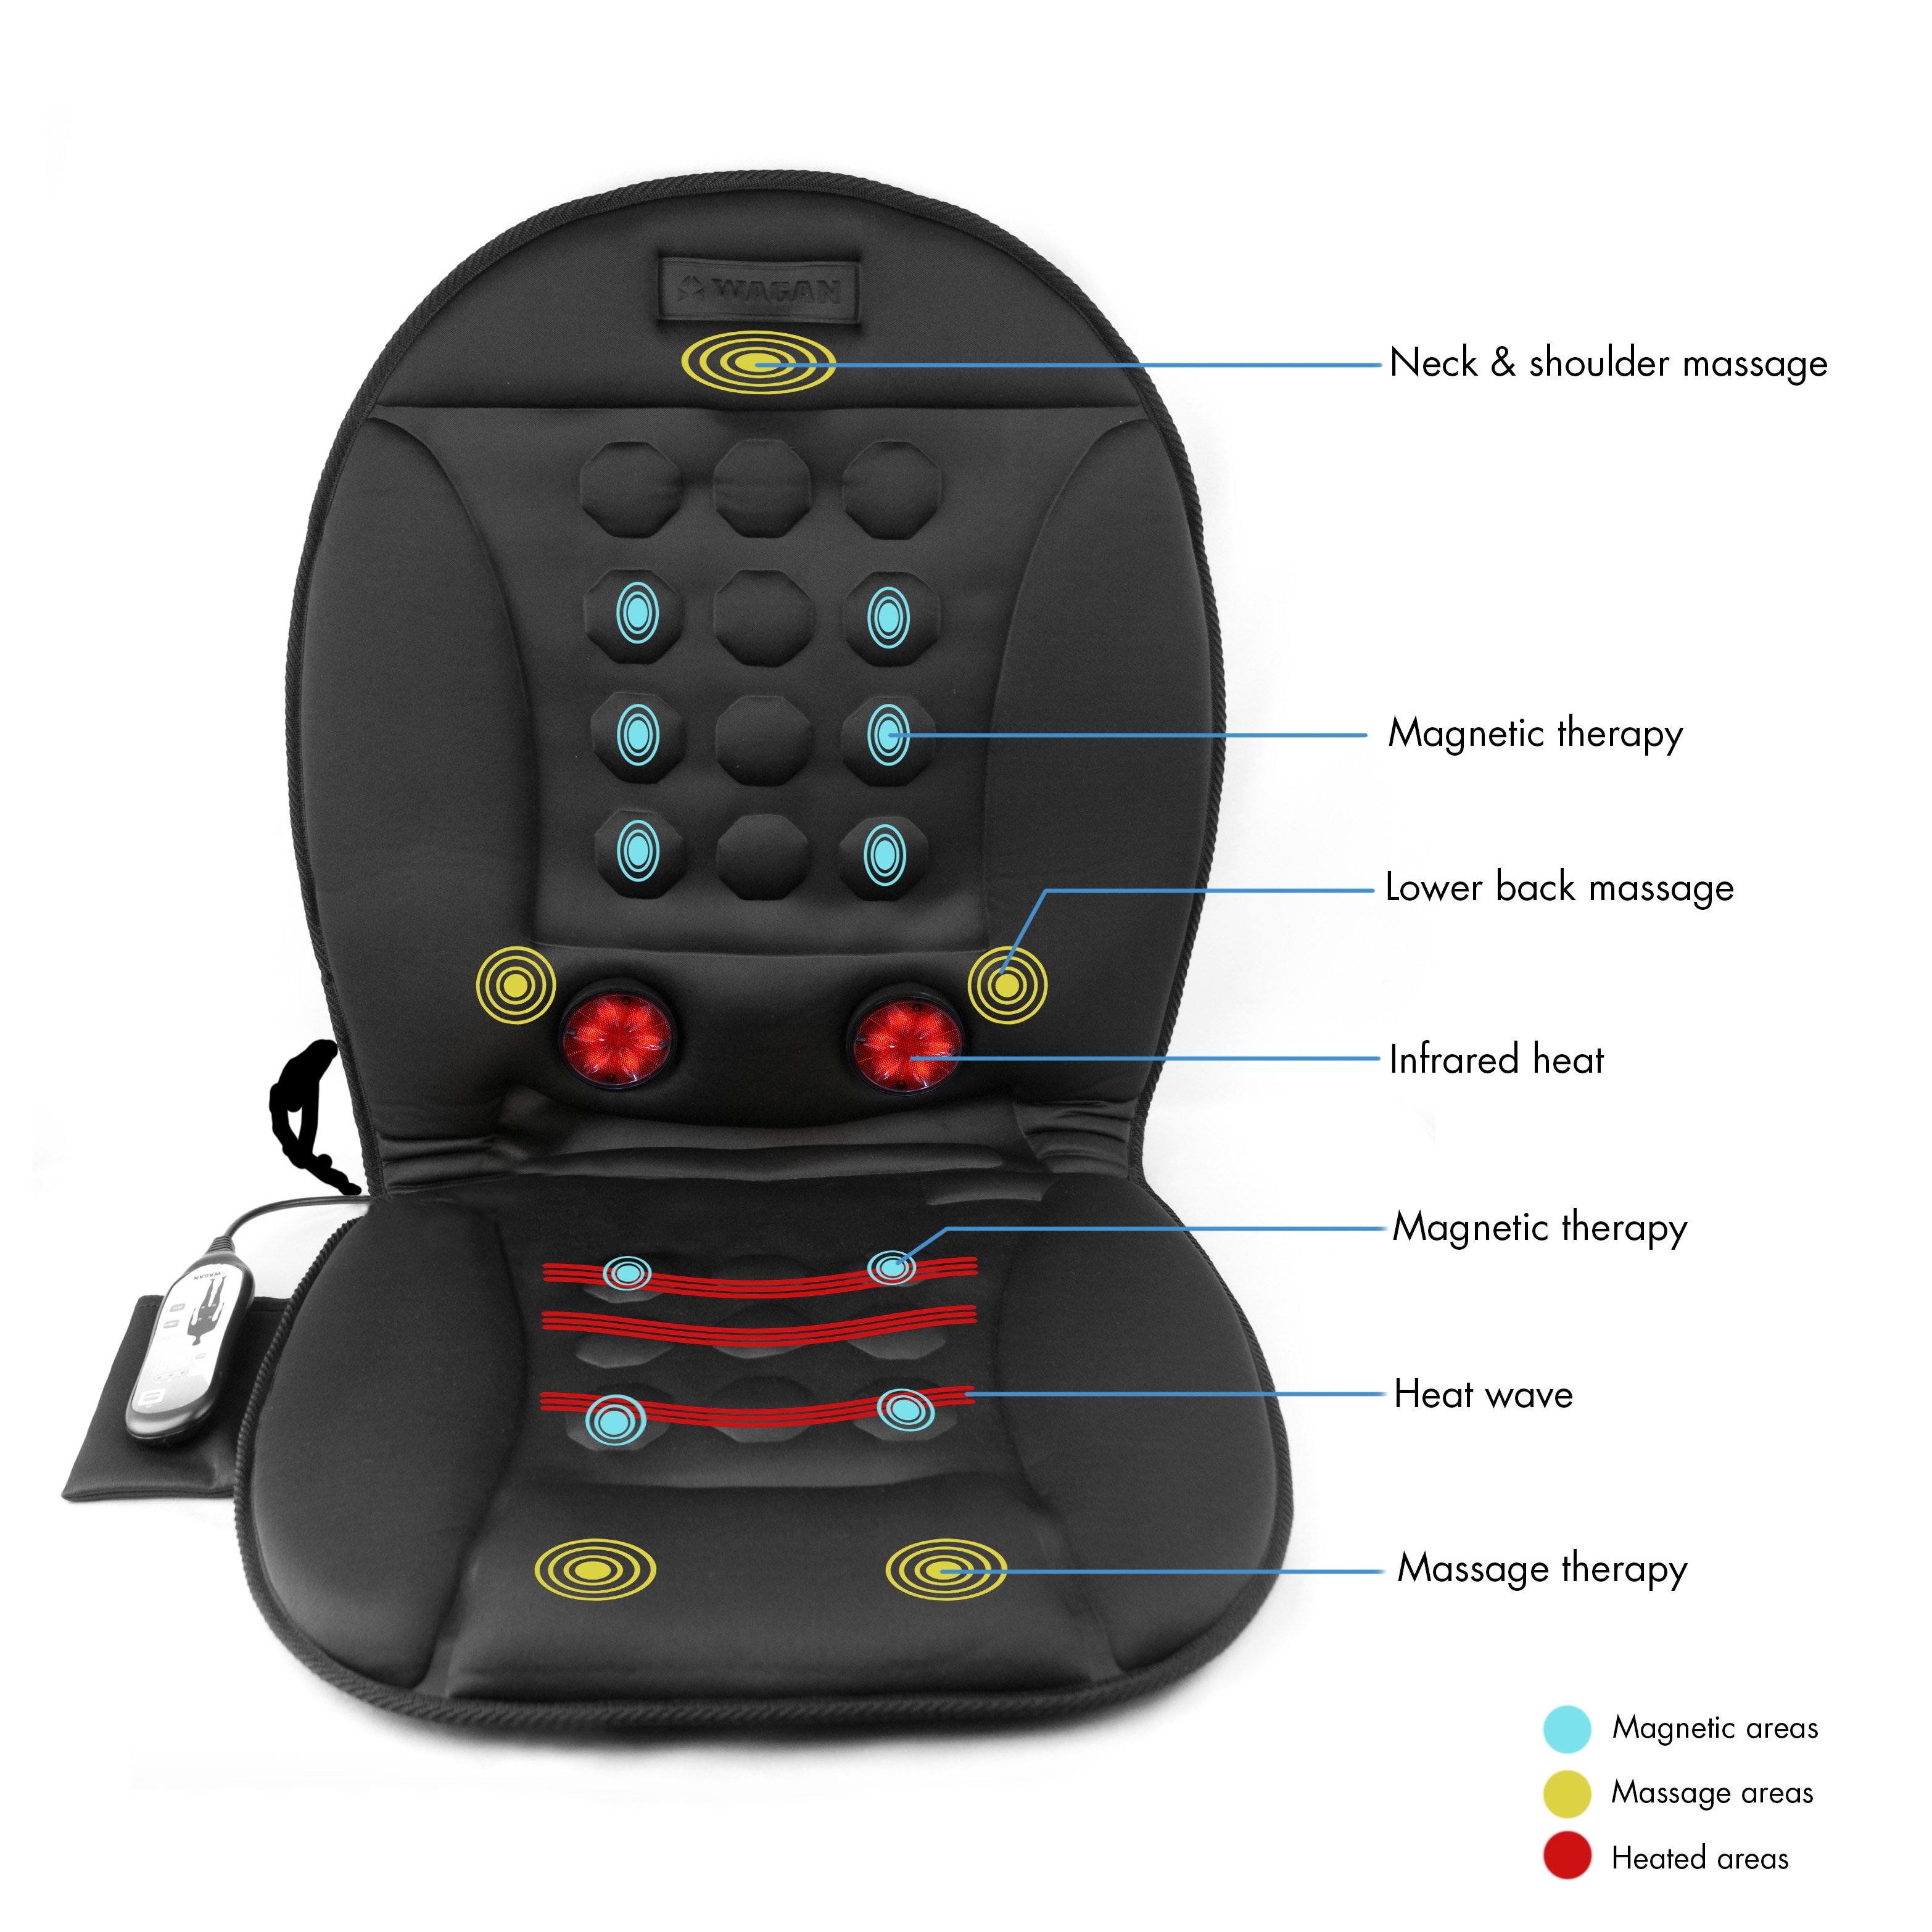 Magnetic Infrared Heat Massager. Neck & back massage Cushion. Infrared foot Massager with Remote Control. Overtaking sensor Seat vibrate.